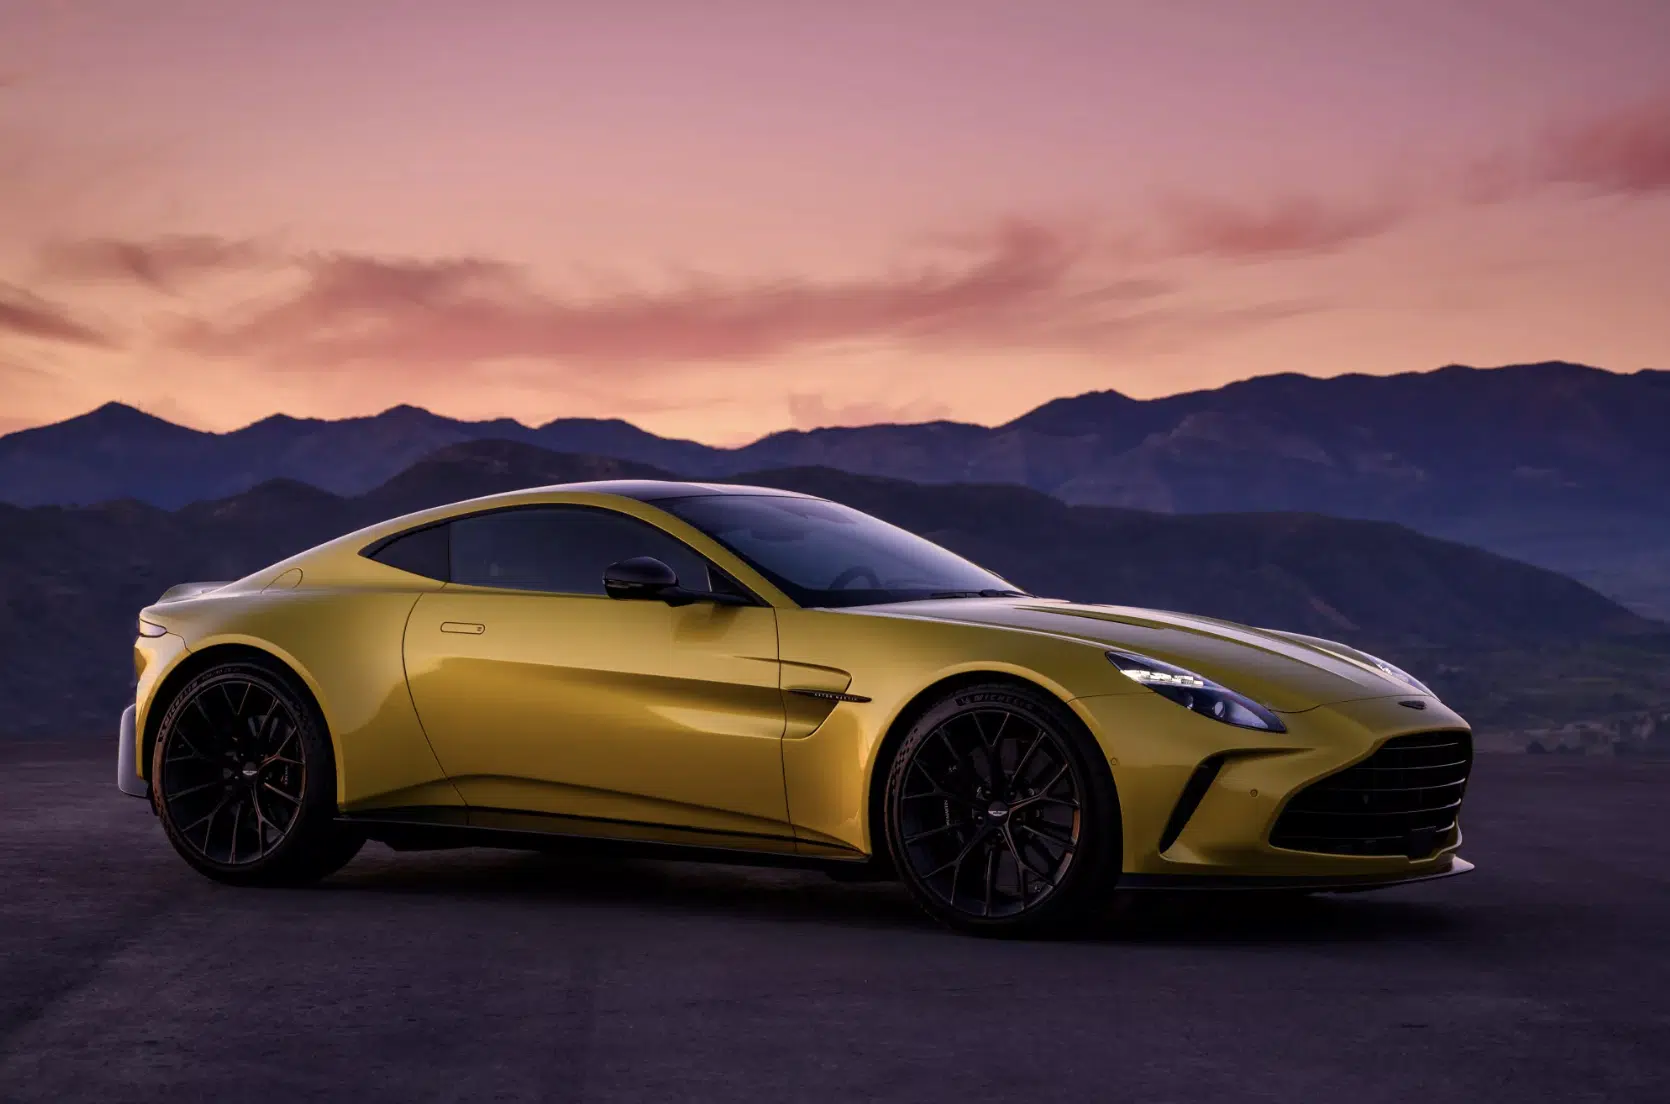 Next Aston Martin flagship model to get fearsome new V12